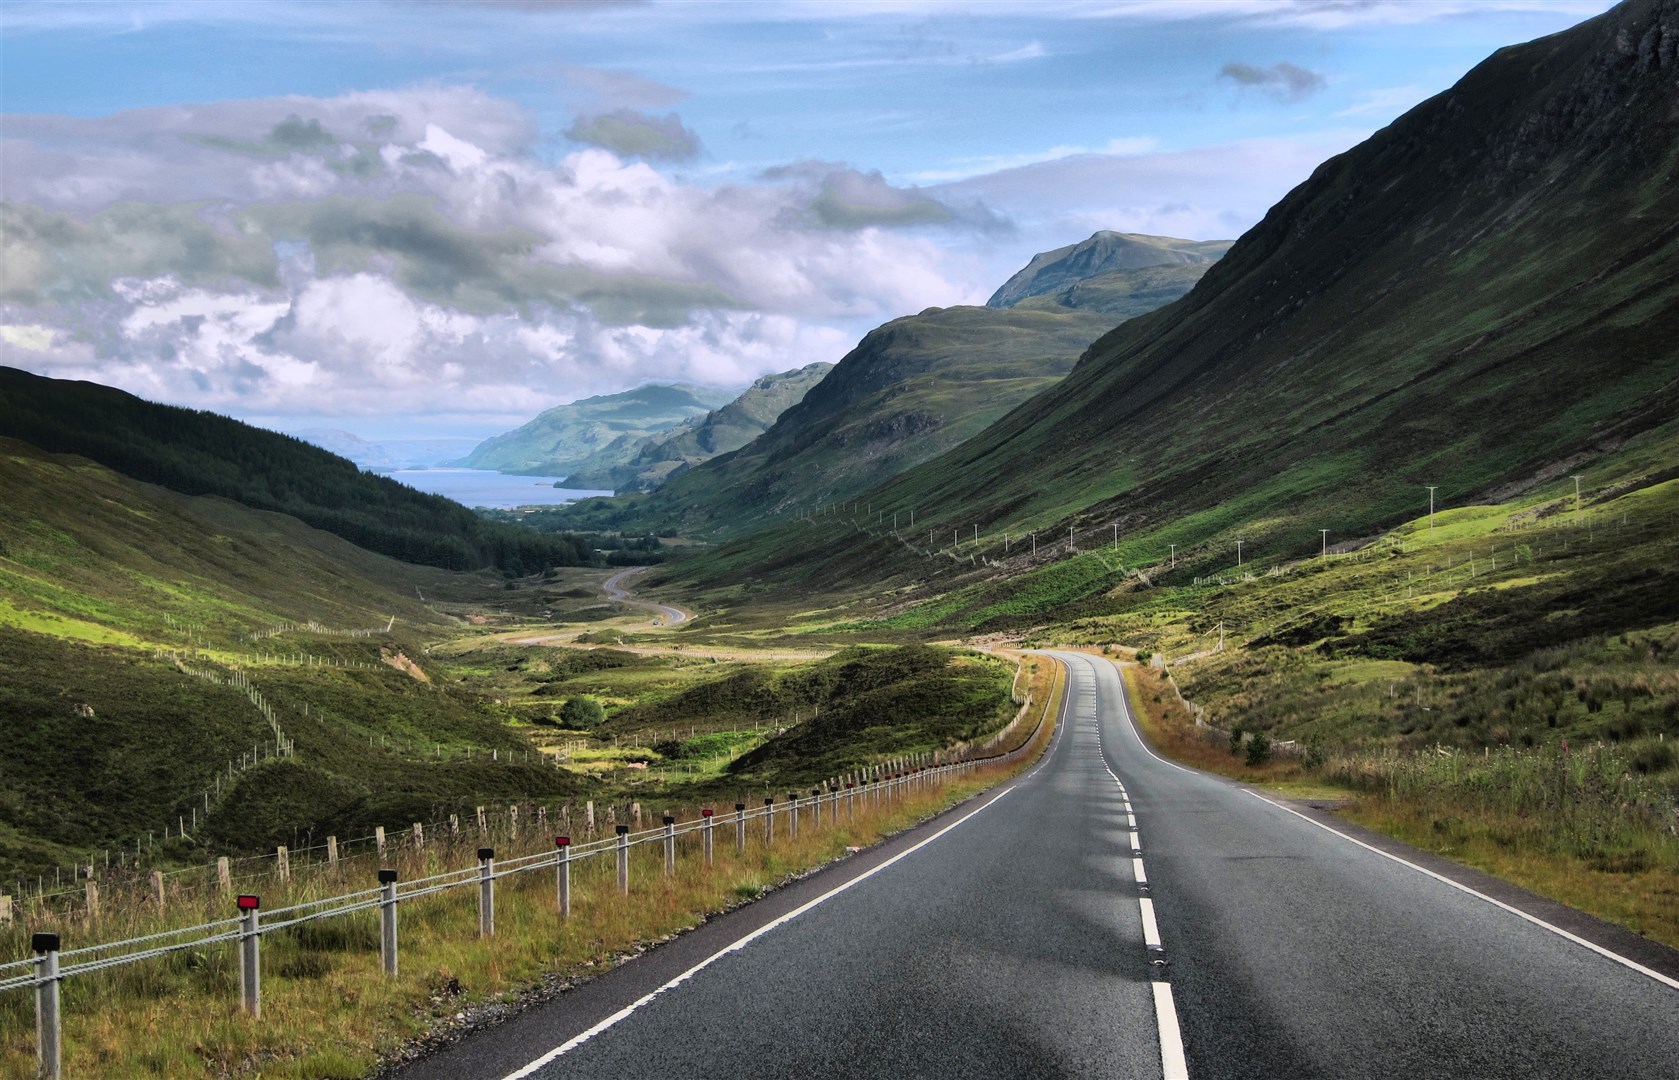 Glen Docherty in Wester Ross is within easy reach of the route.